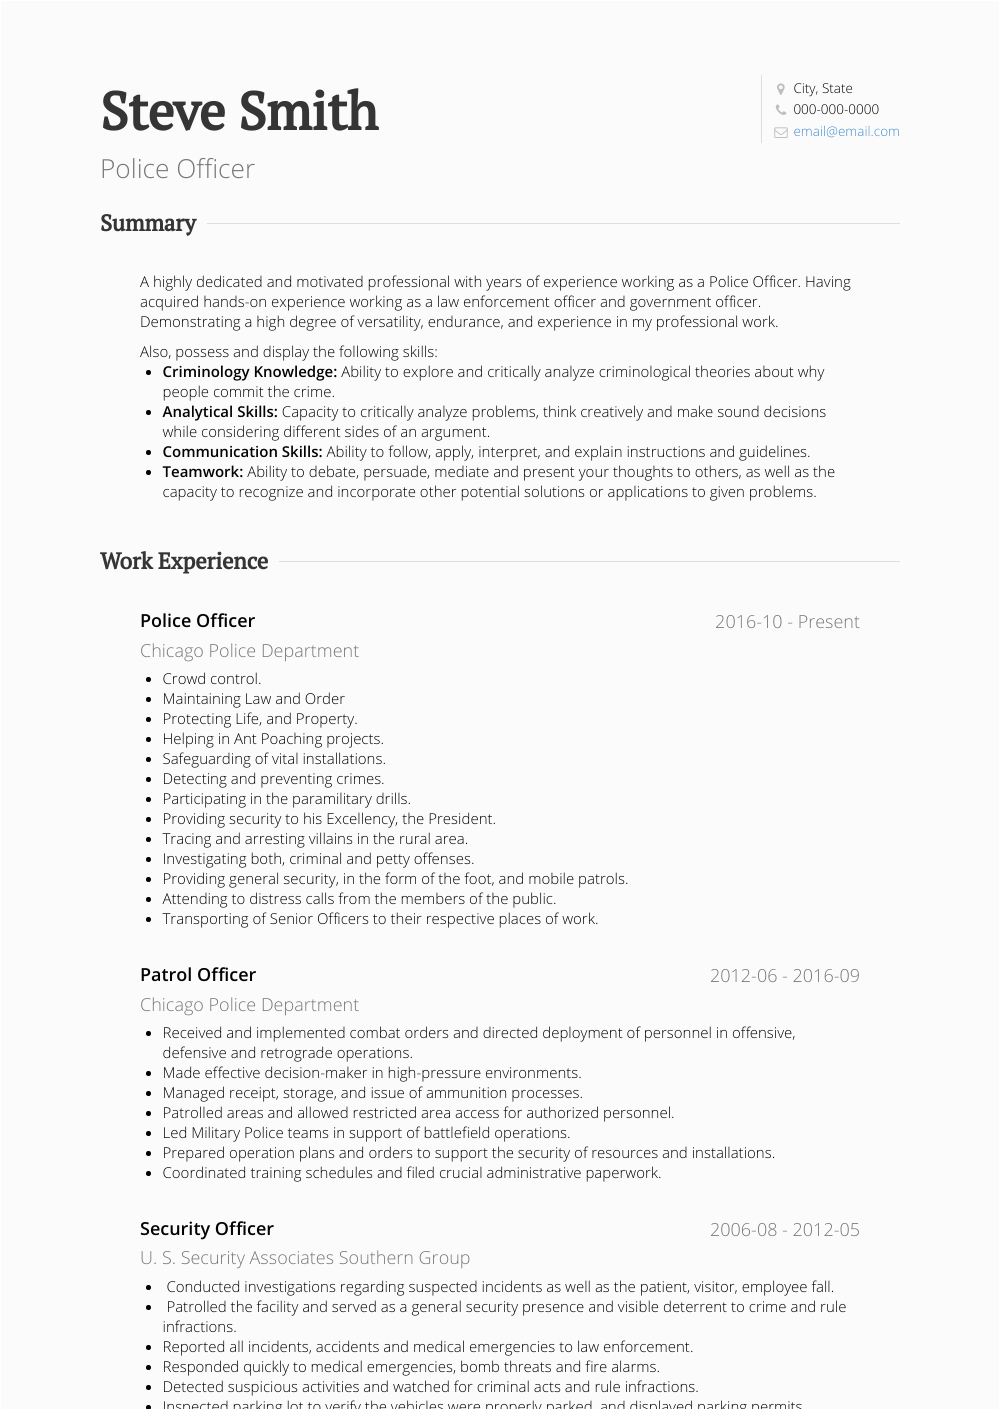 Sample Resume to Become A Police Officer Police Ficer Resume Samples and Templates